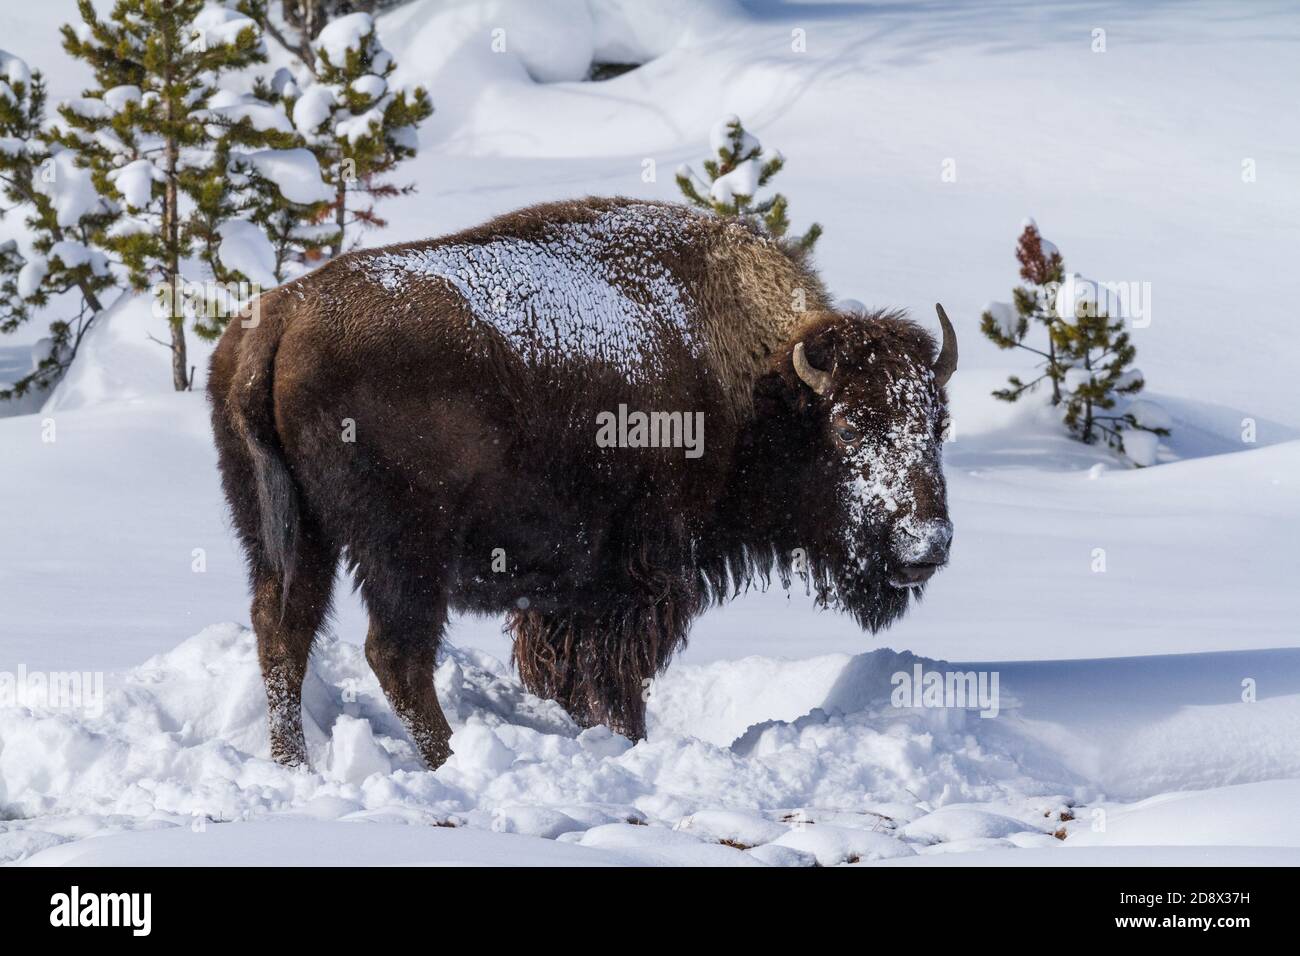 An American bison in the snow in Yellowstone National Park, Wyoming, USA. Stock Photo